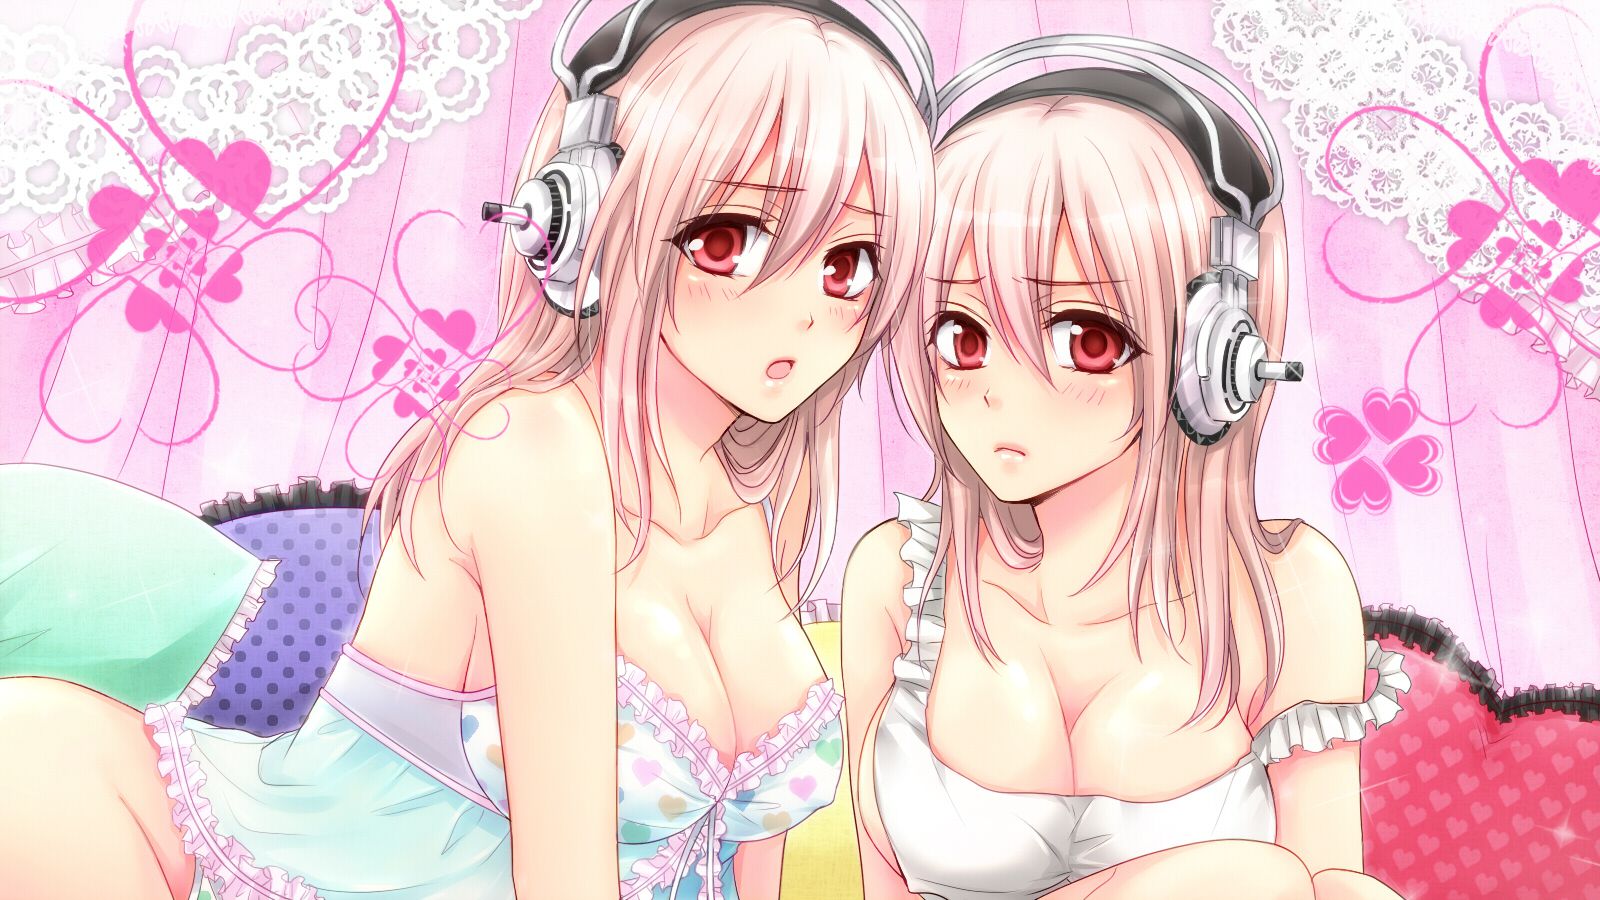 Drew trap picture or headphone girl えろあ. Vol.6 28